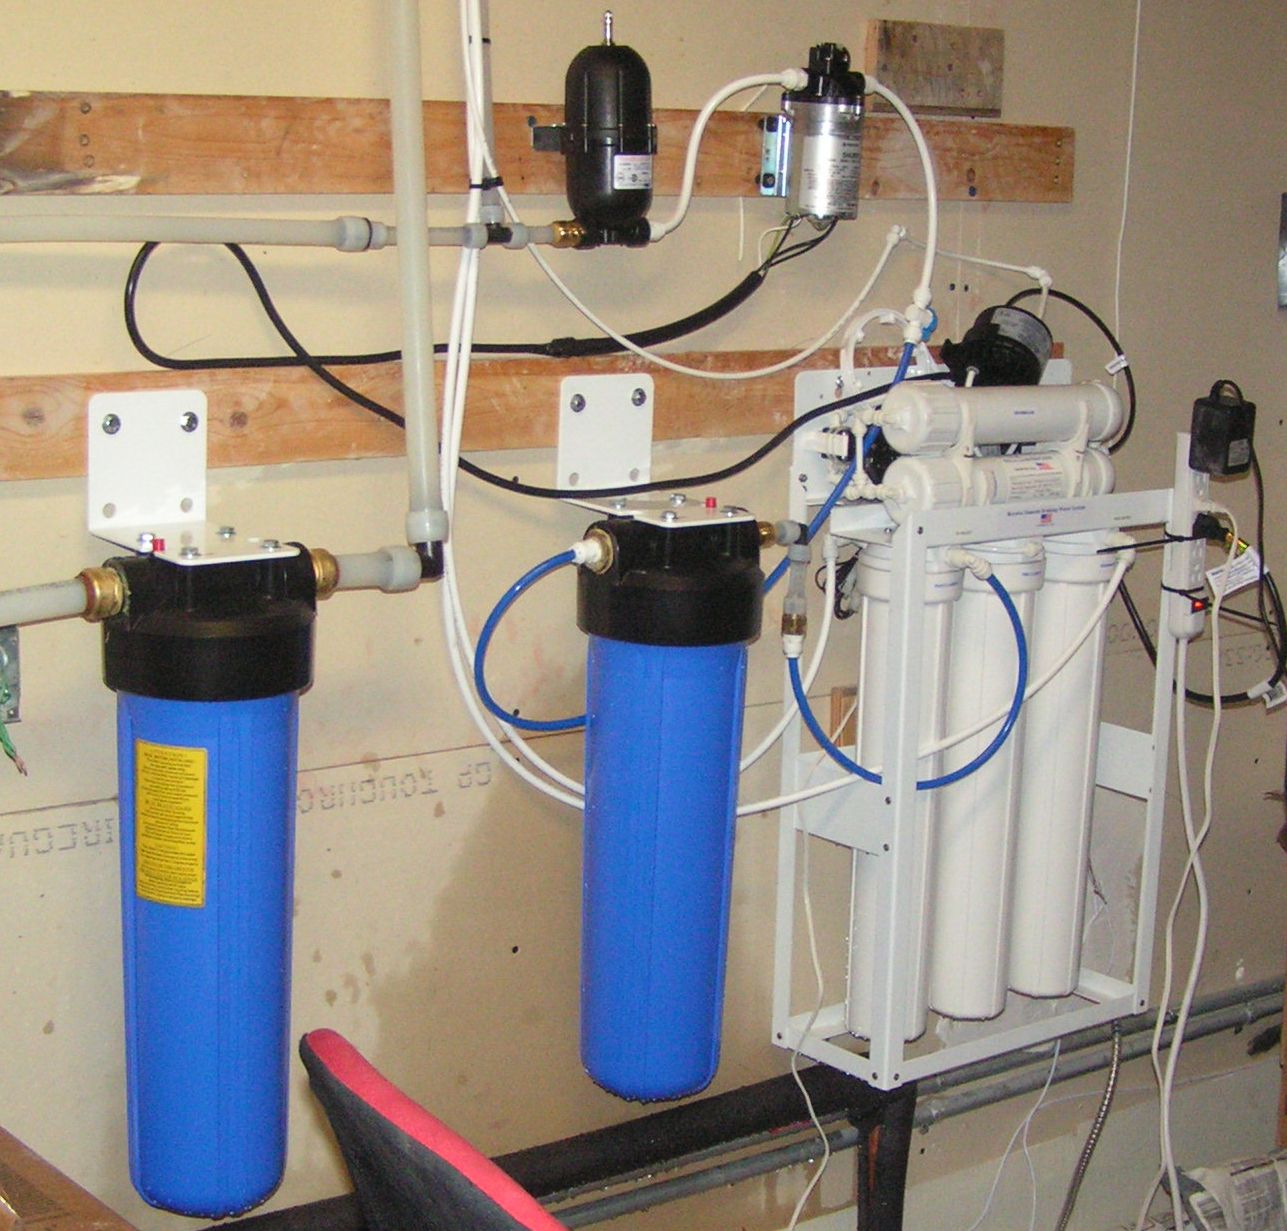 Best Reverse Osmosis Systems